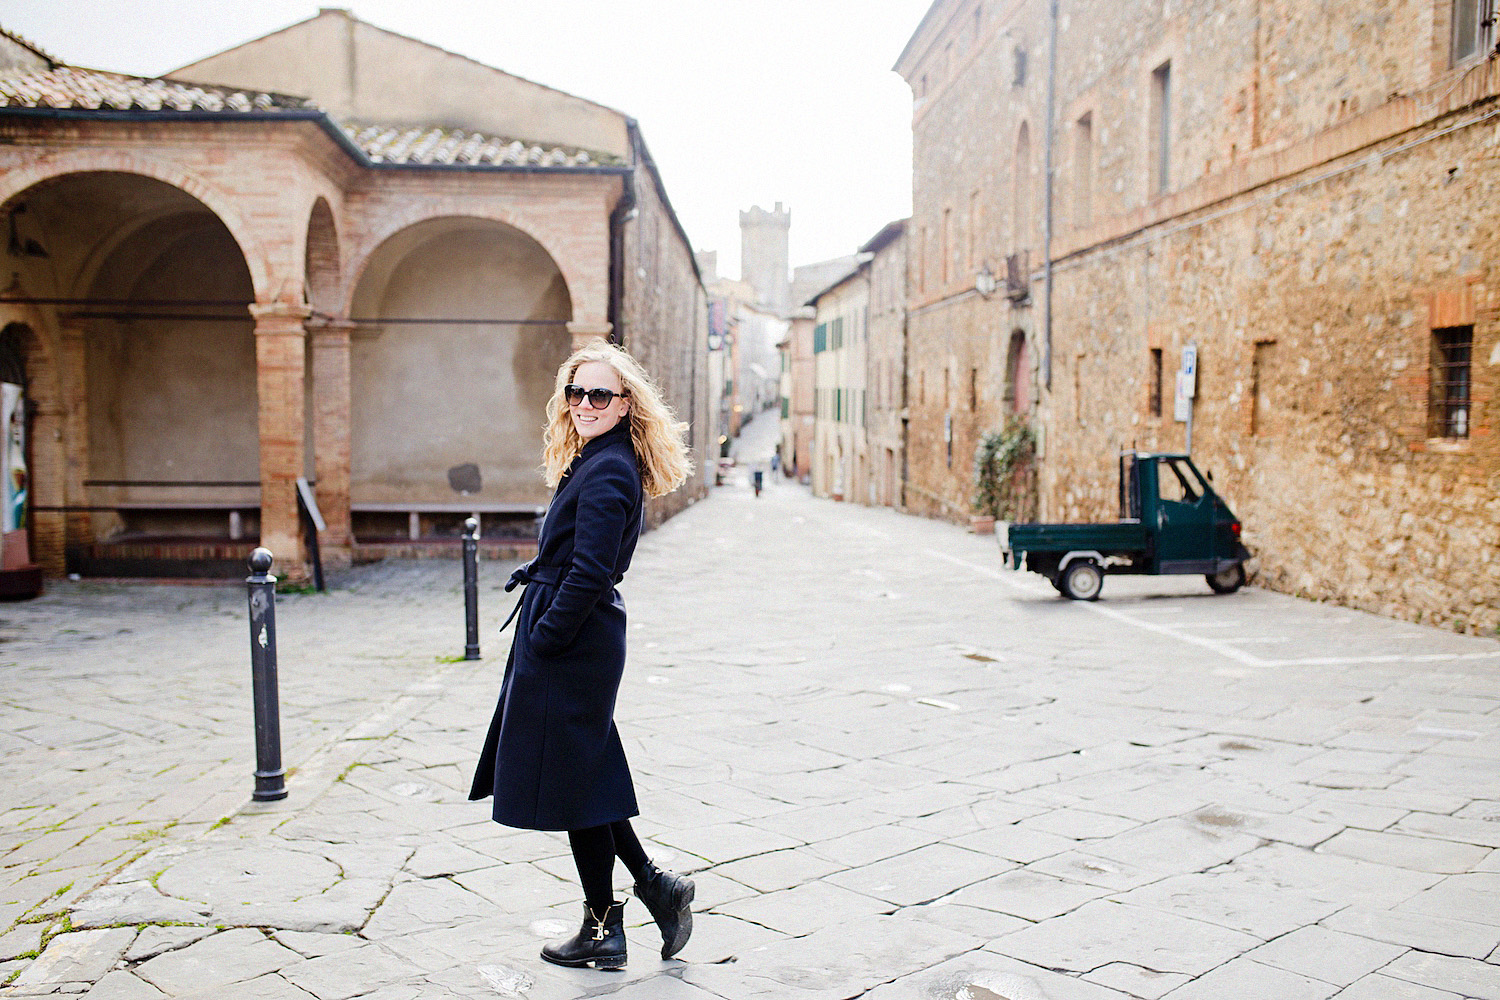 Tuscany | 5 cute villages to visit in Val D’Orcia valley (+ hotel recommendations)